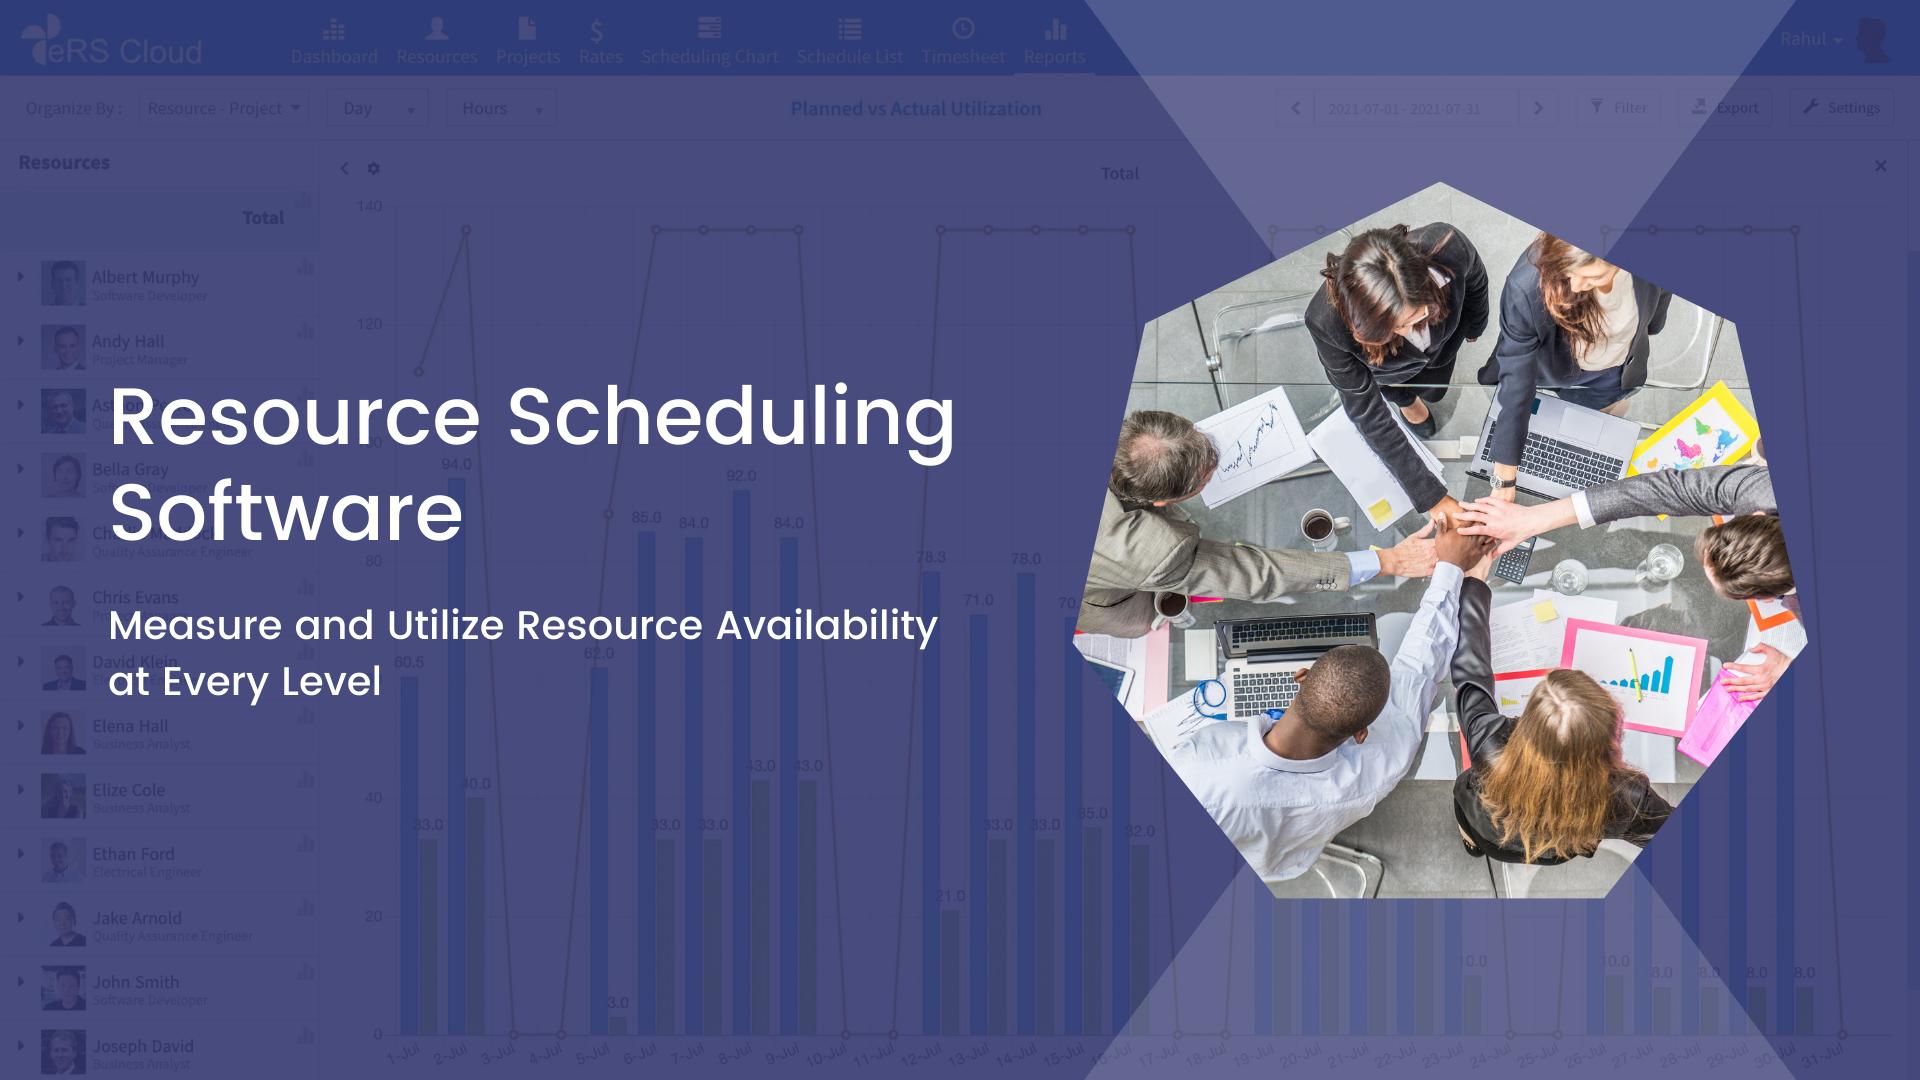 Resource Scheduling Software – Measure and Utilize Resource Availability at Every Level